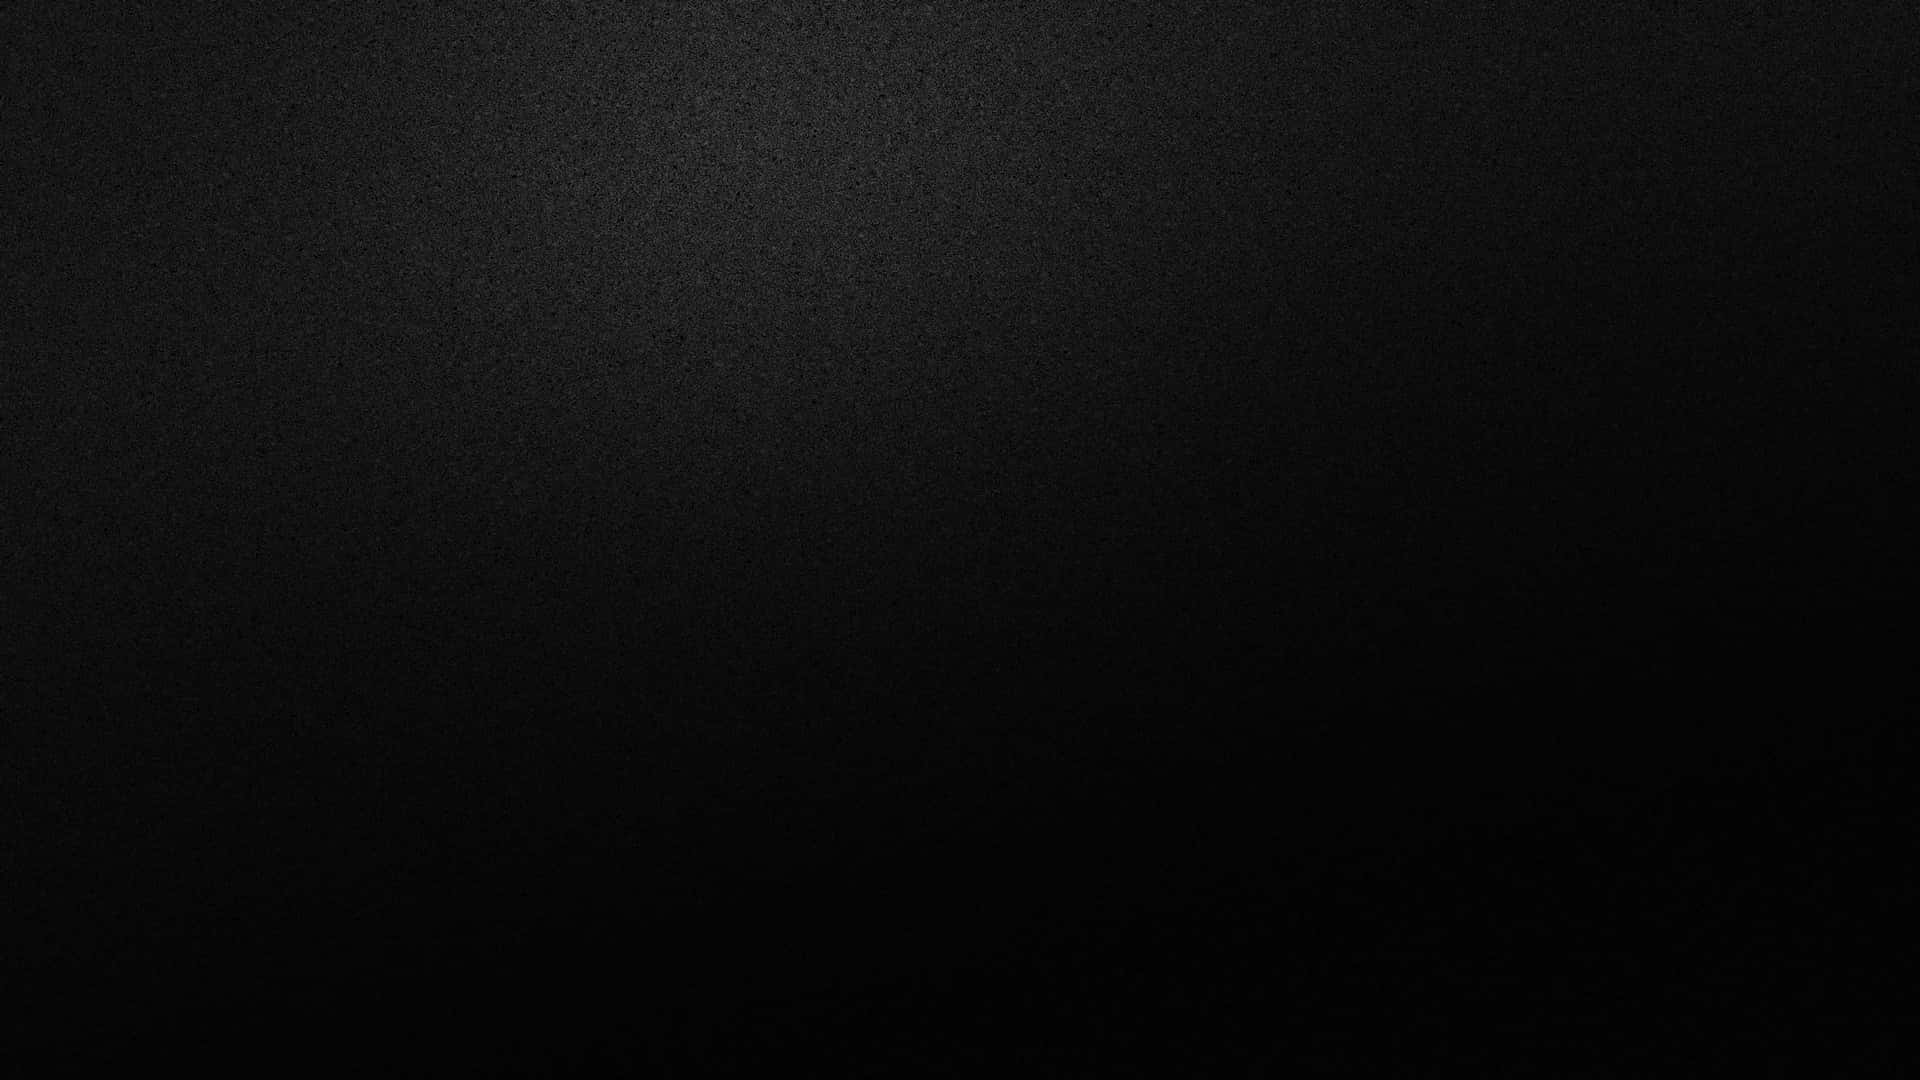 Download Smooth And Polished Black Texture Background | Wallpapers.com